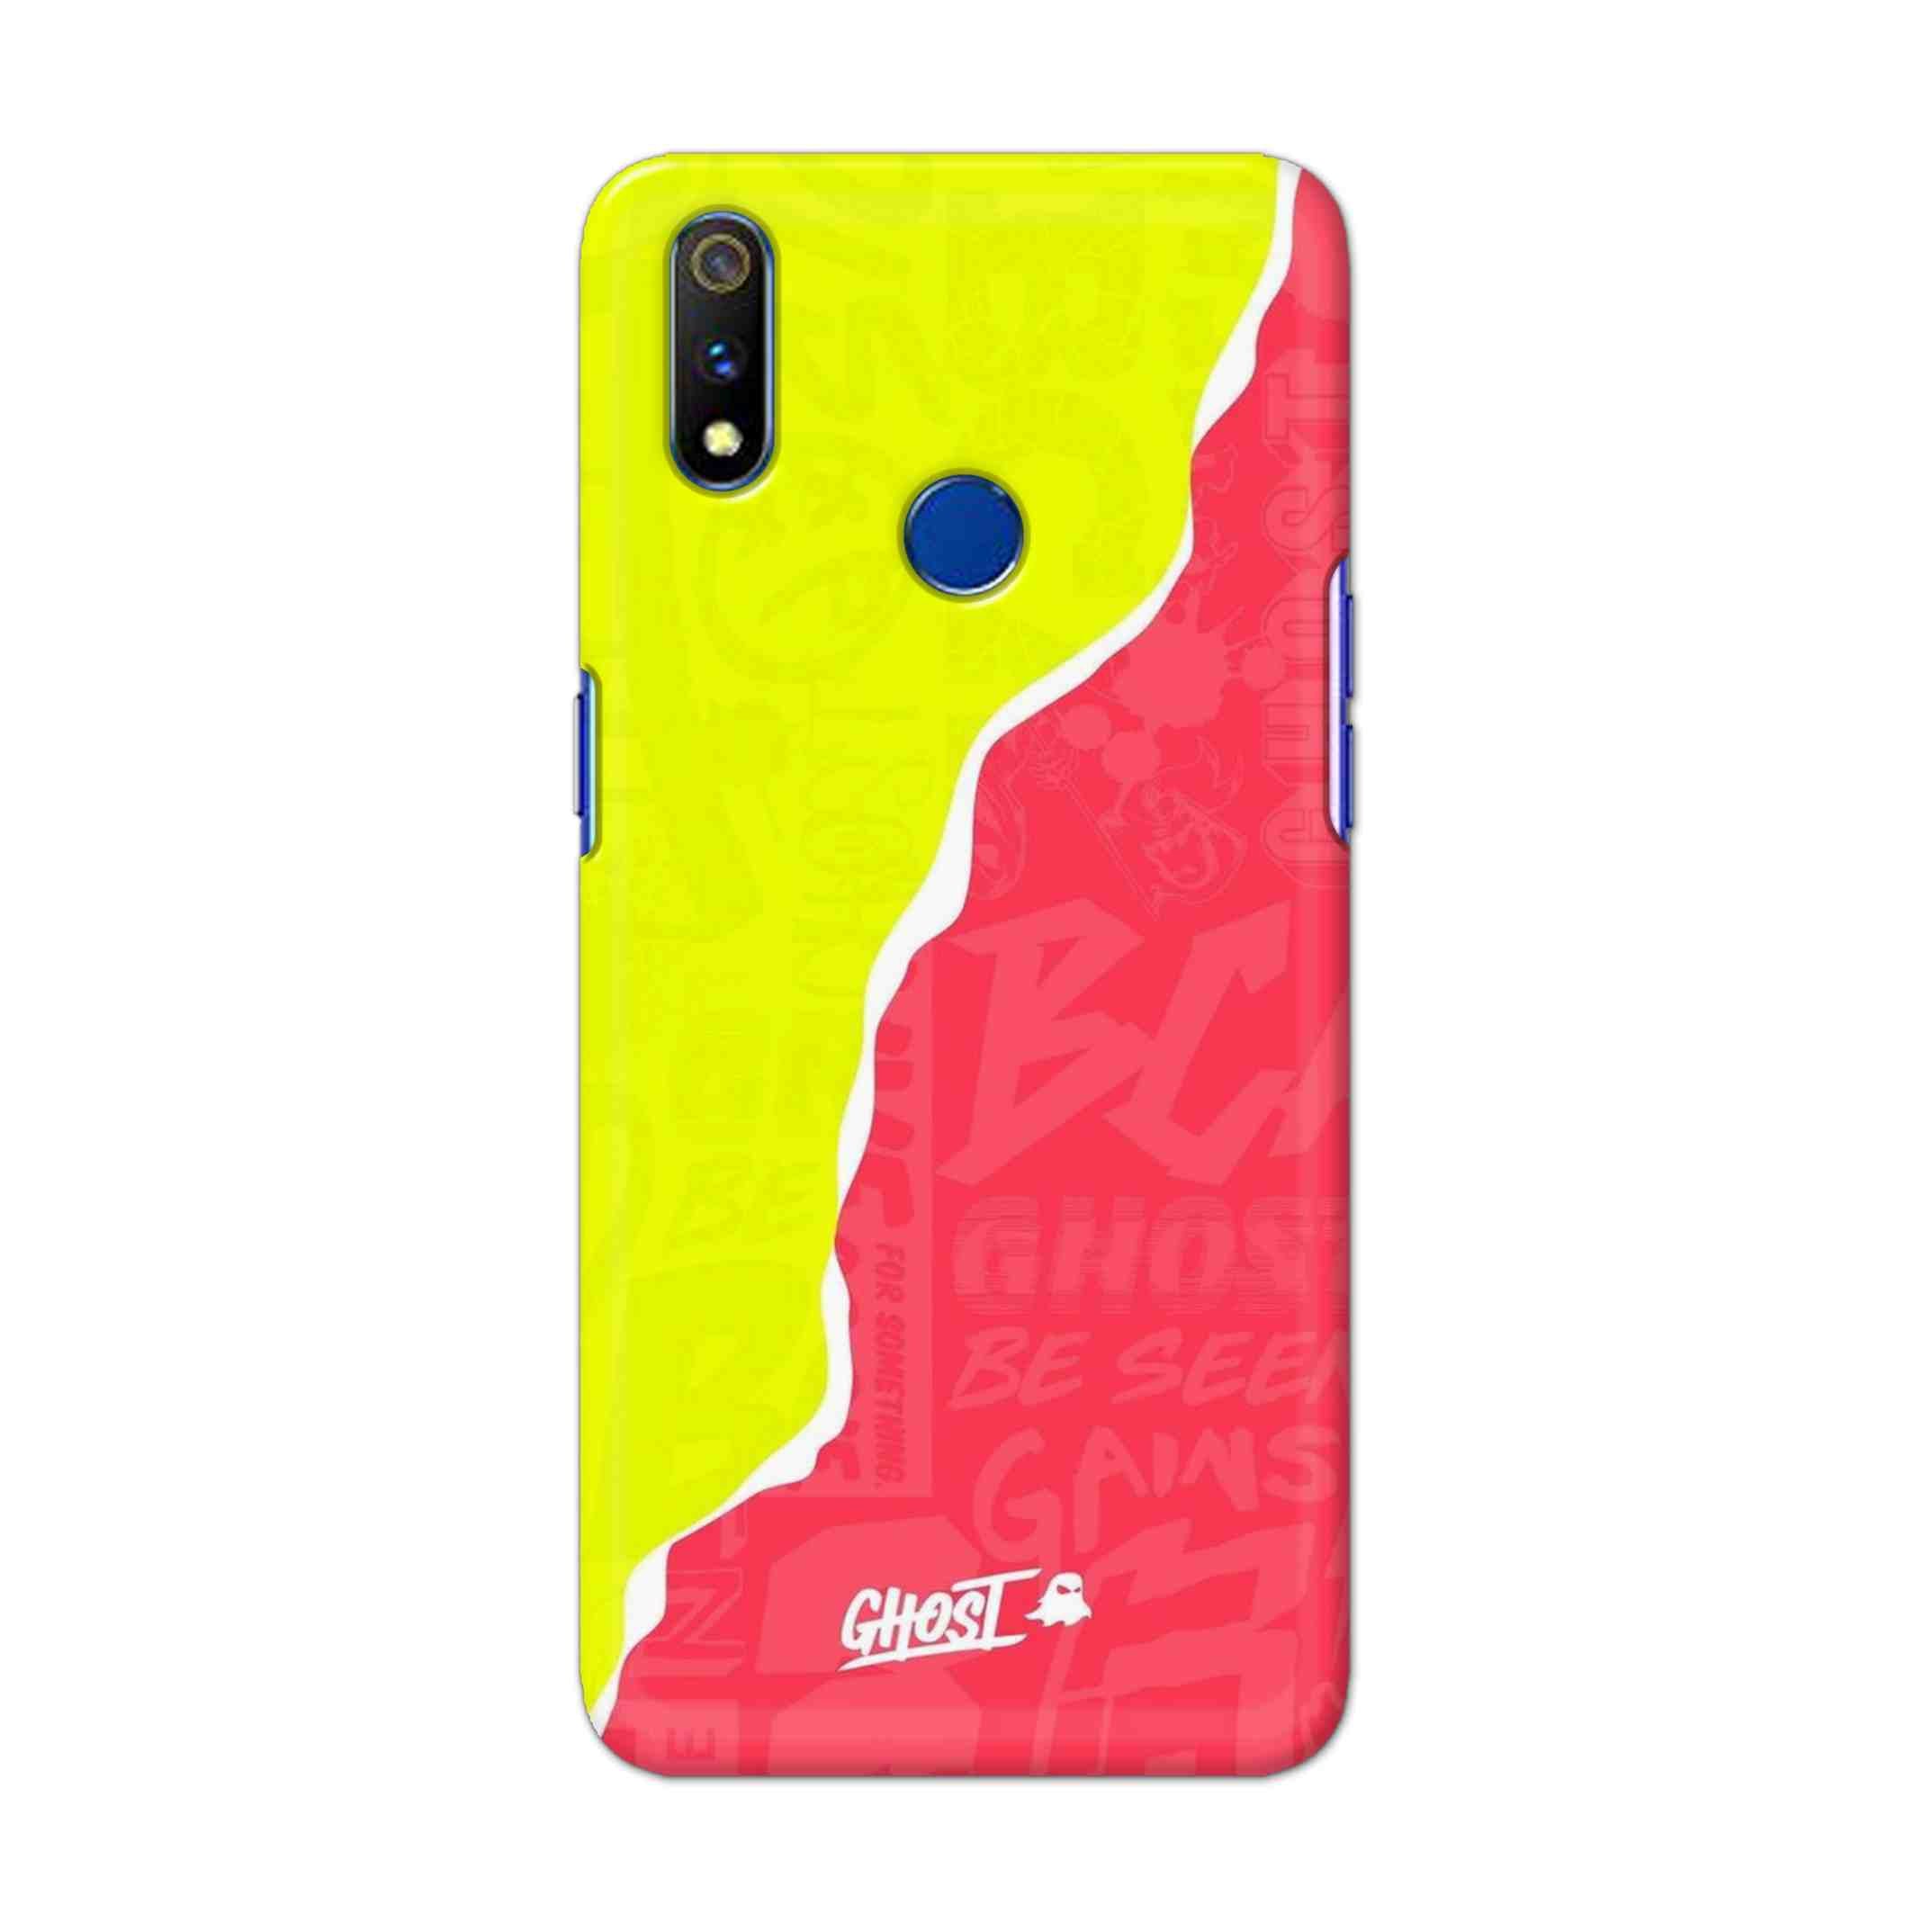 Buy Ghost Hard Back Mobile Phone Case Cover For Realme 3 Pro Online